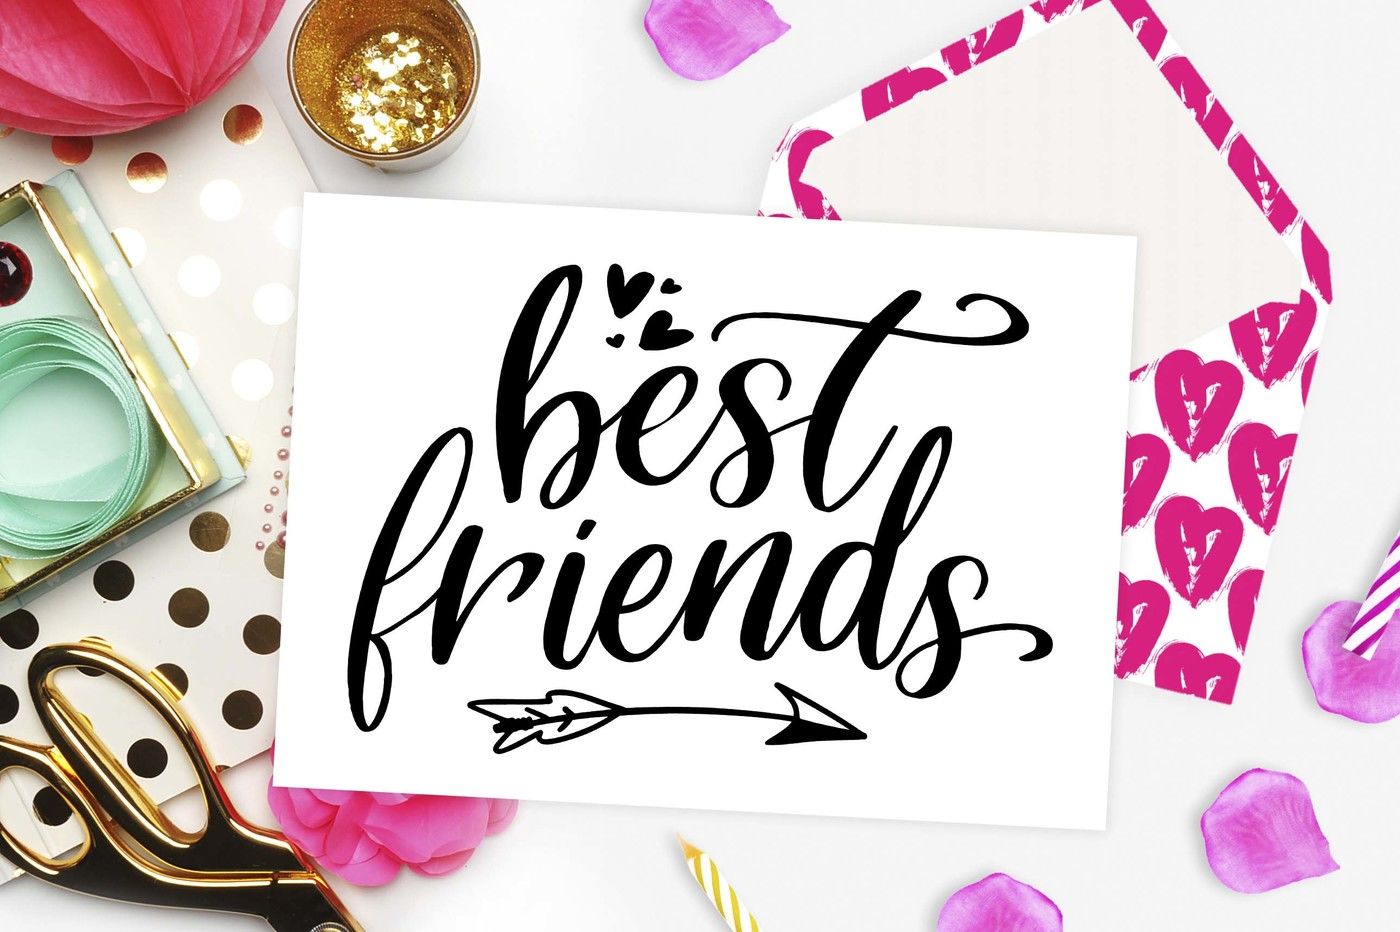 Best friends SVG DXF PNG EPS By TheBlackCatPrints | TheHungryJPEG.com